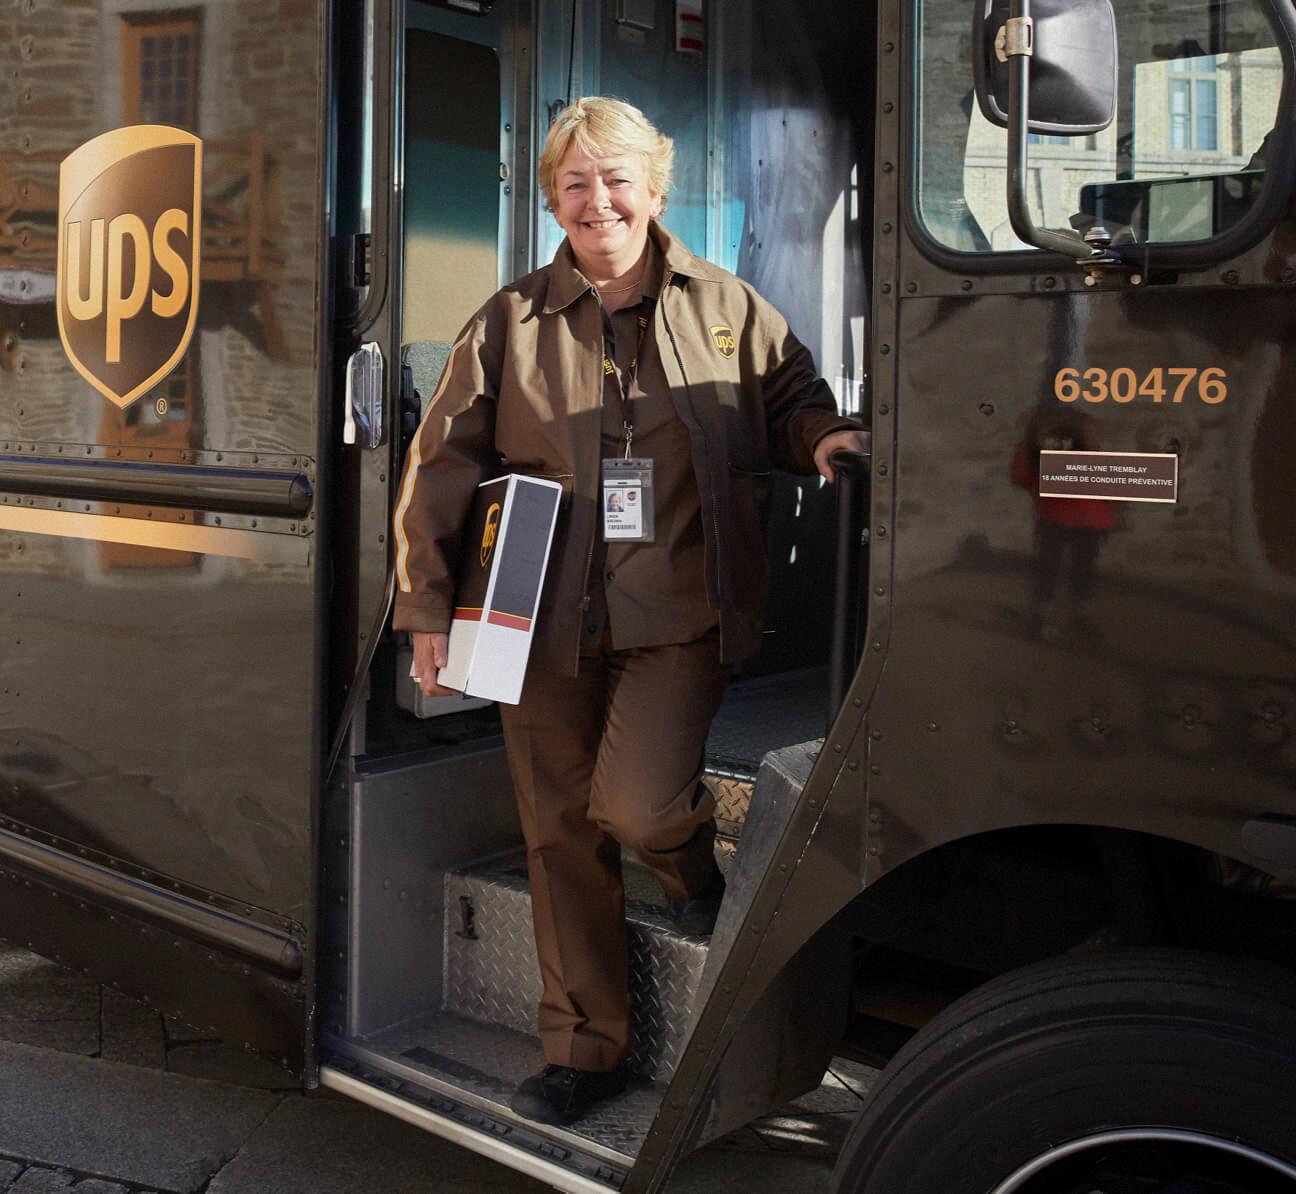 UPS Mailbox Cost and Everything Else You Need to Know